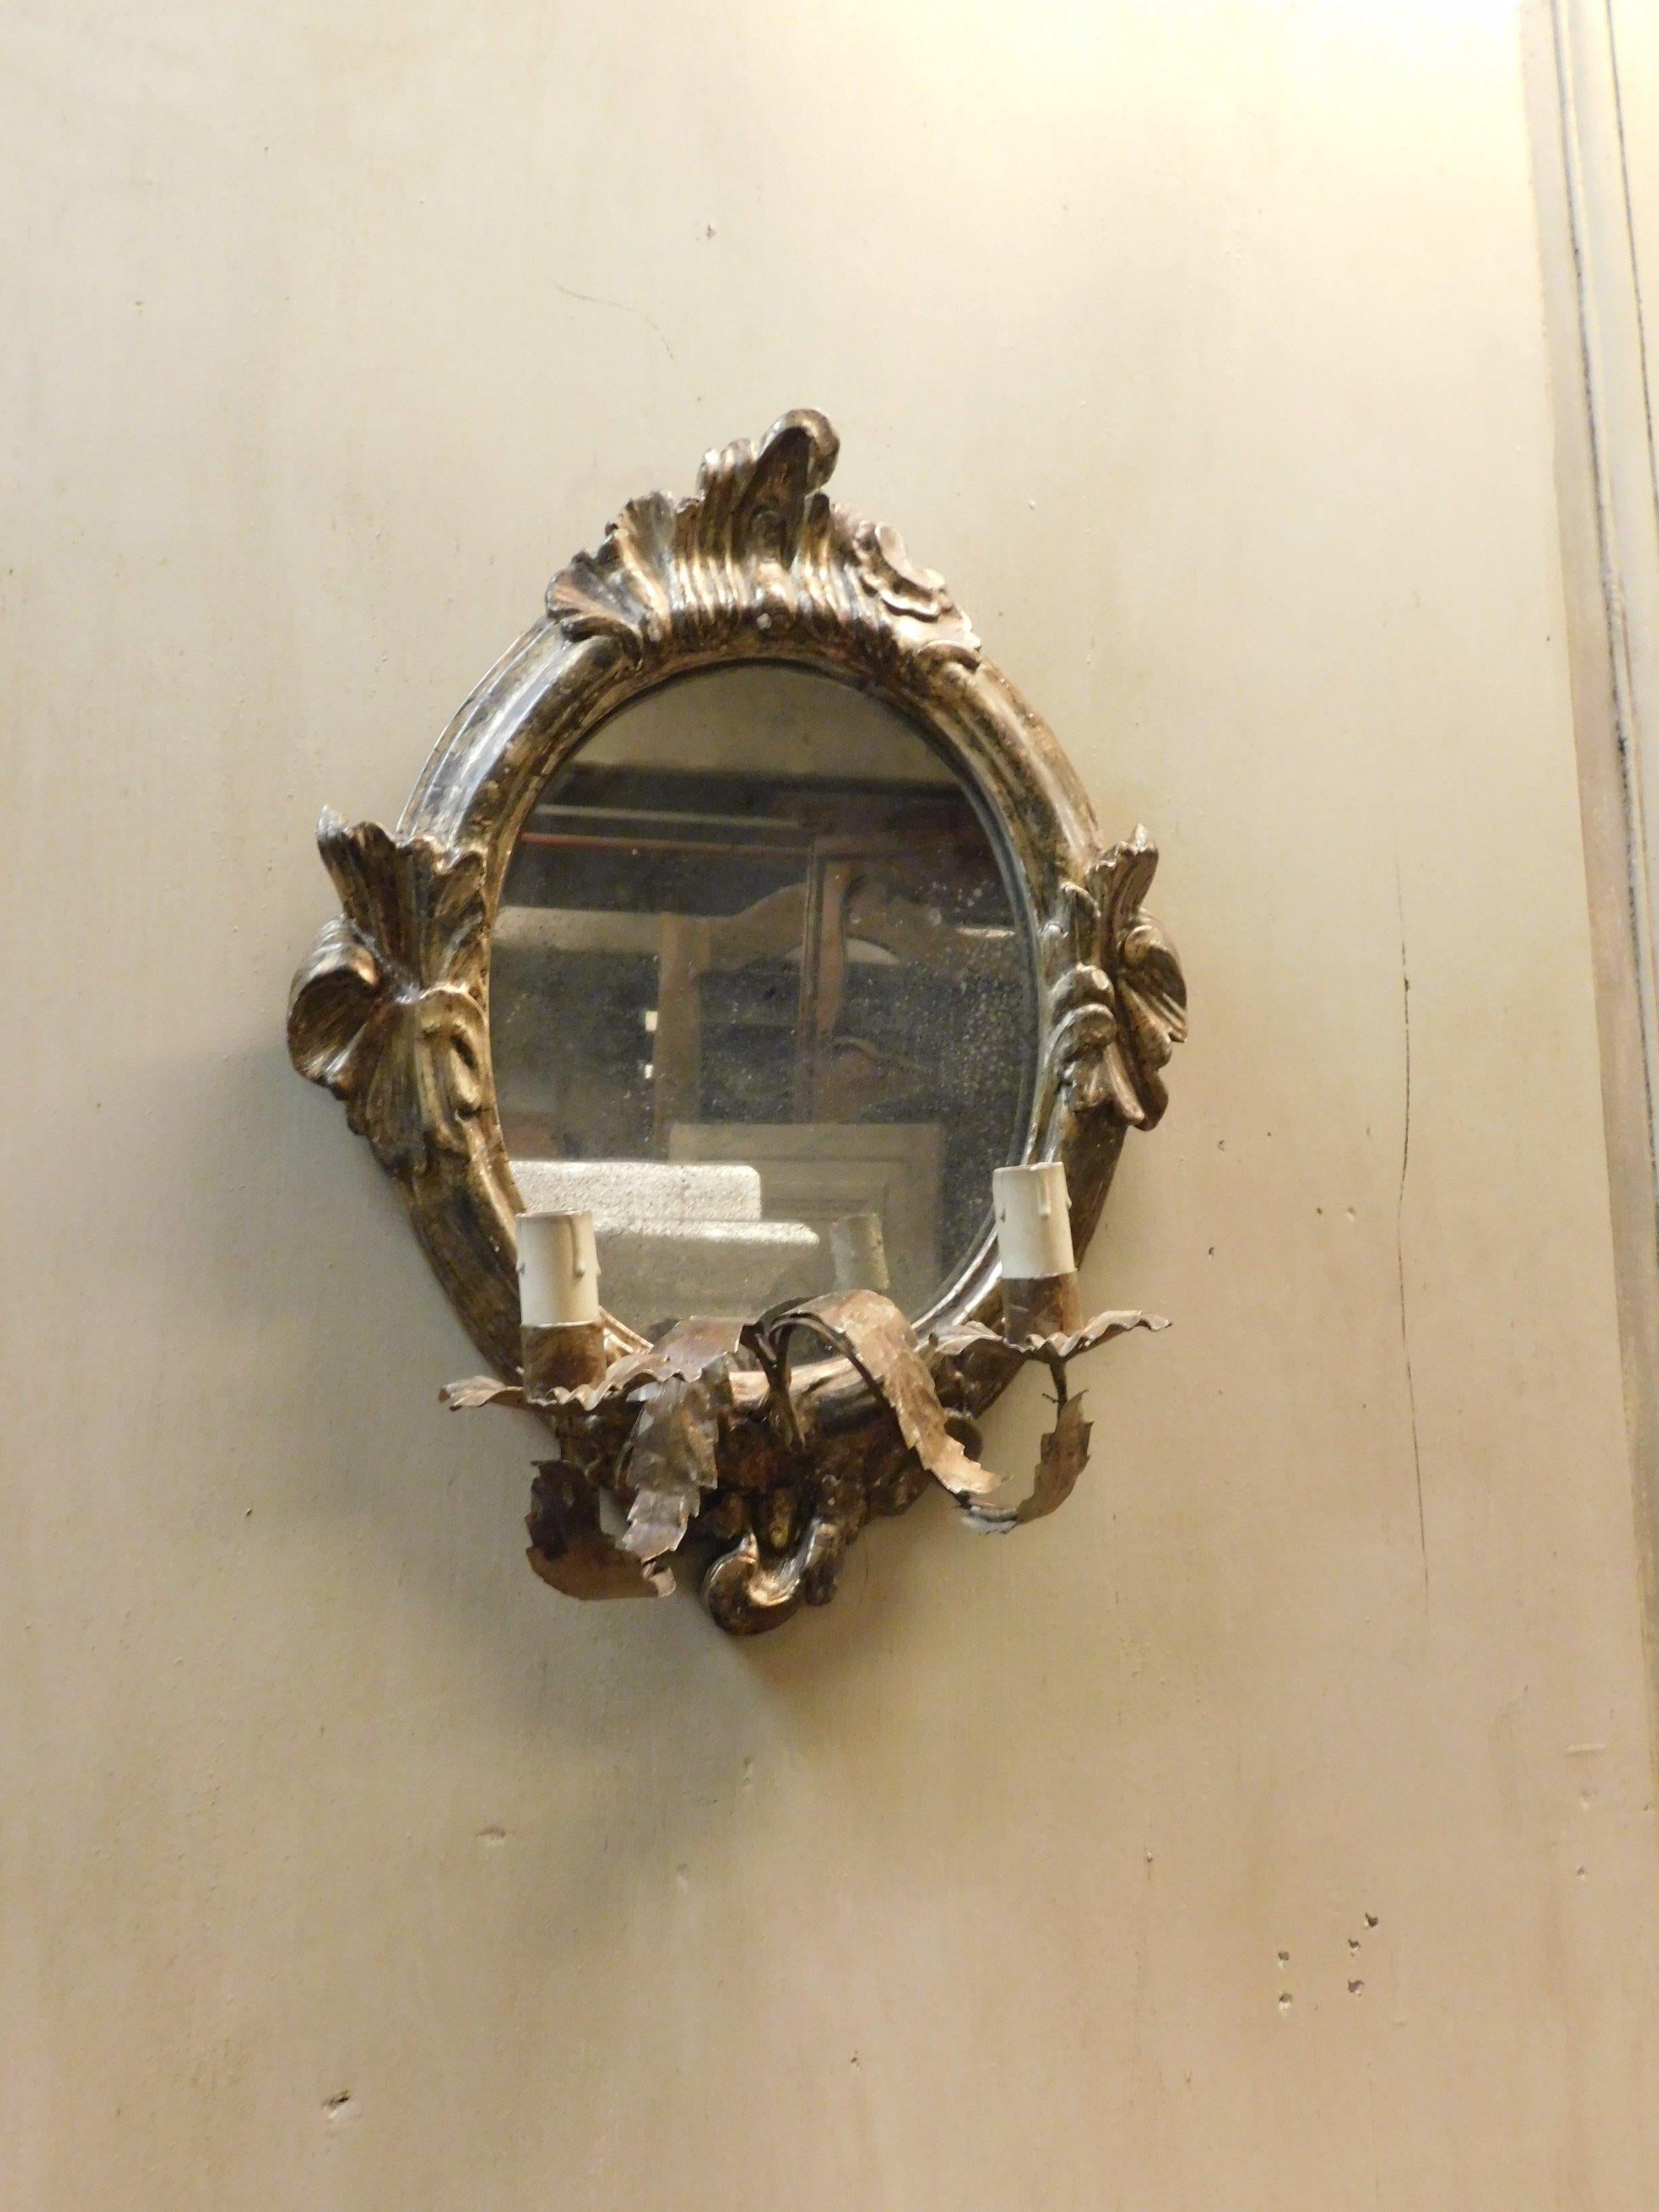 Antique pair of small mirrors with original silver plating, fans with arms for double lights in wrought iron, sold only in pairs, built in the 18th century, for home interiors in Italy.
Historical and of great value, really suitable for any place